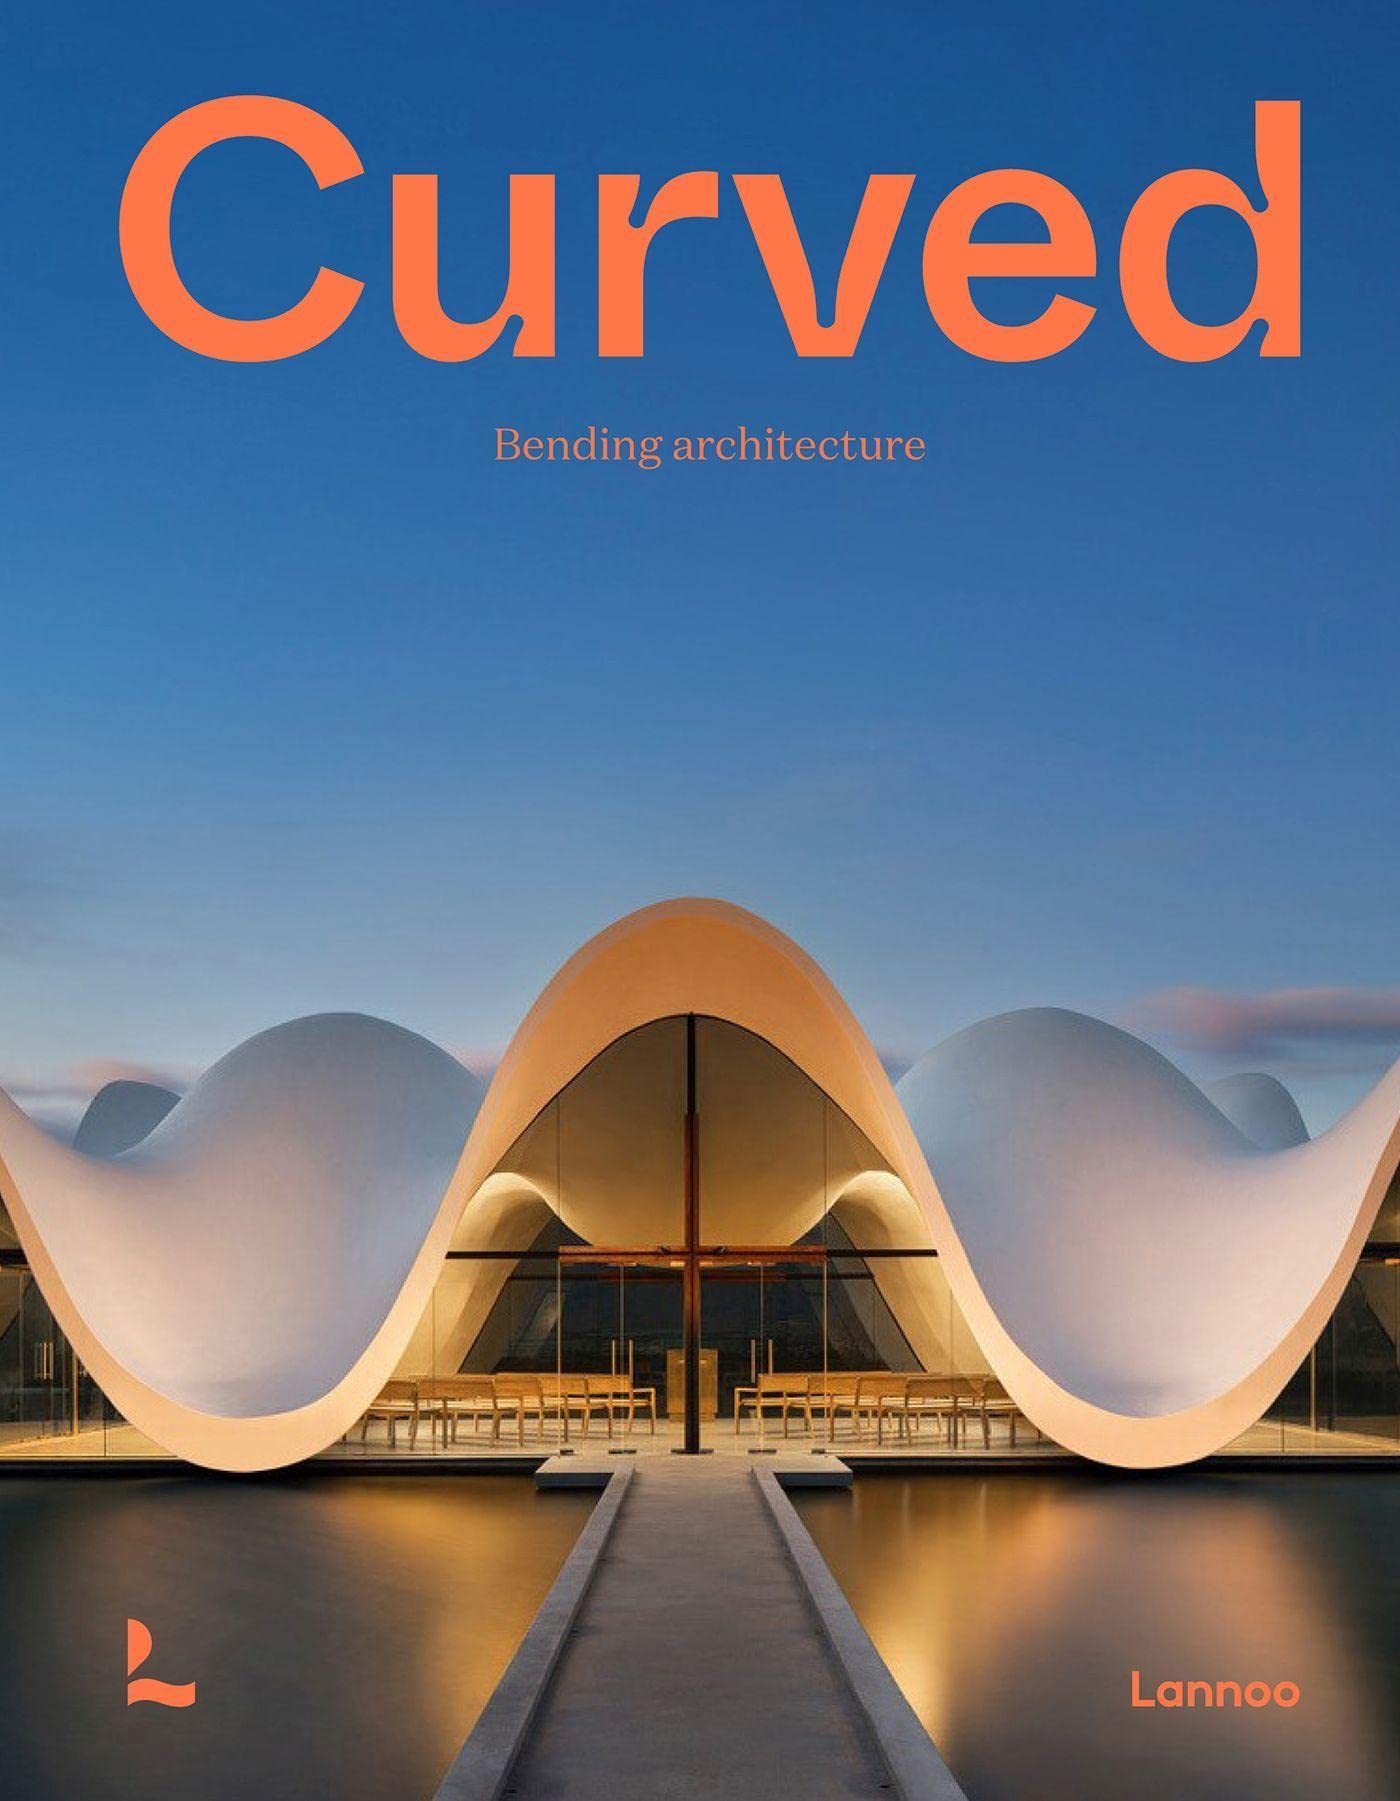 Curved: Bending Architecture zaha hadid complete works 1979 today